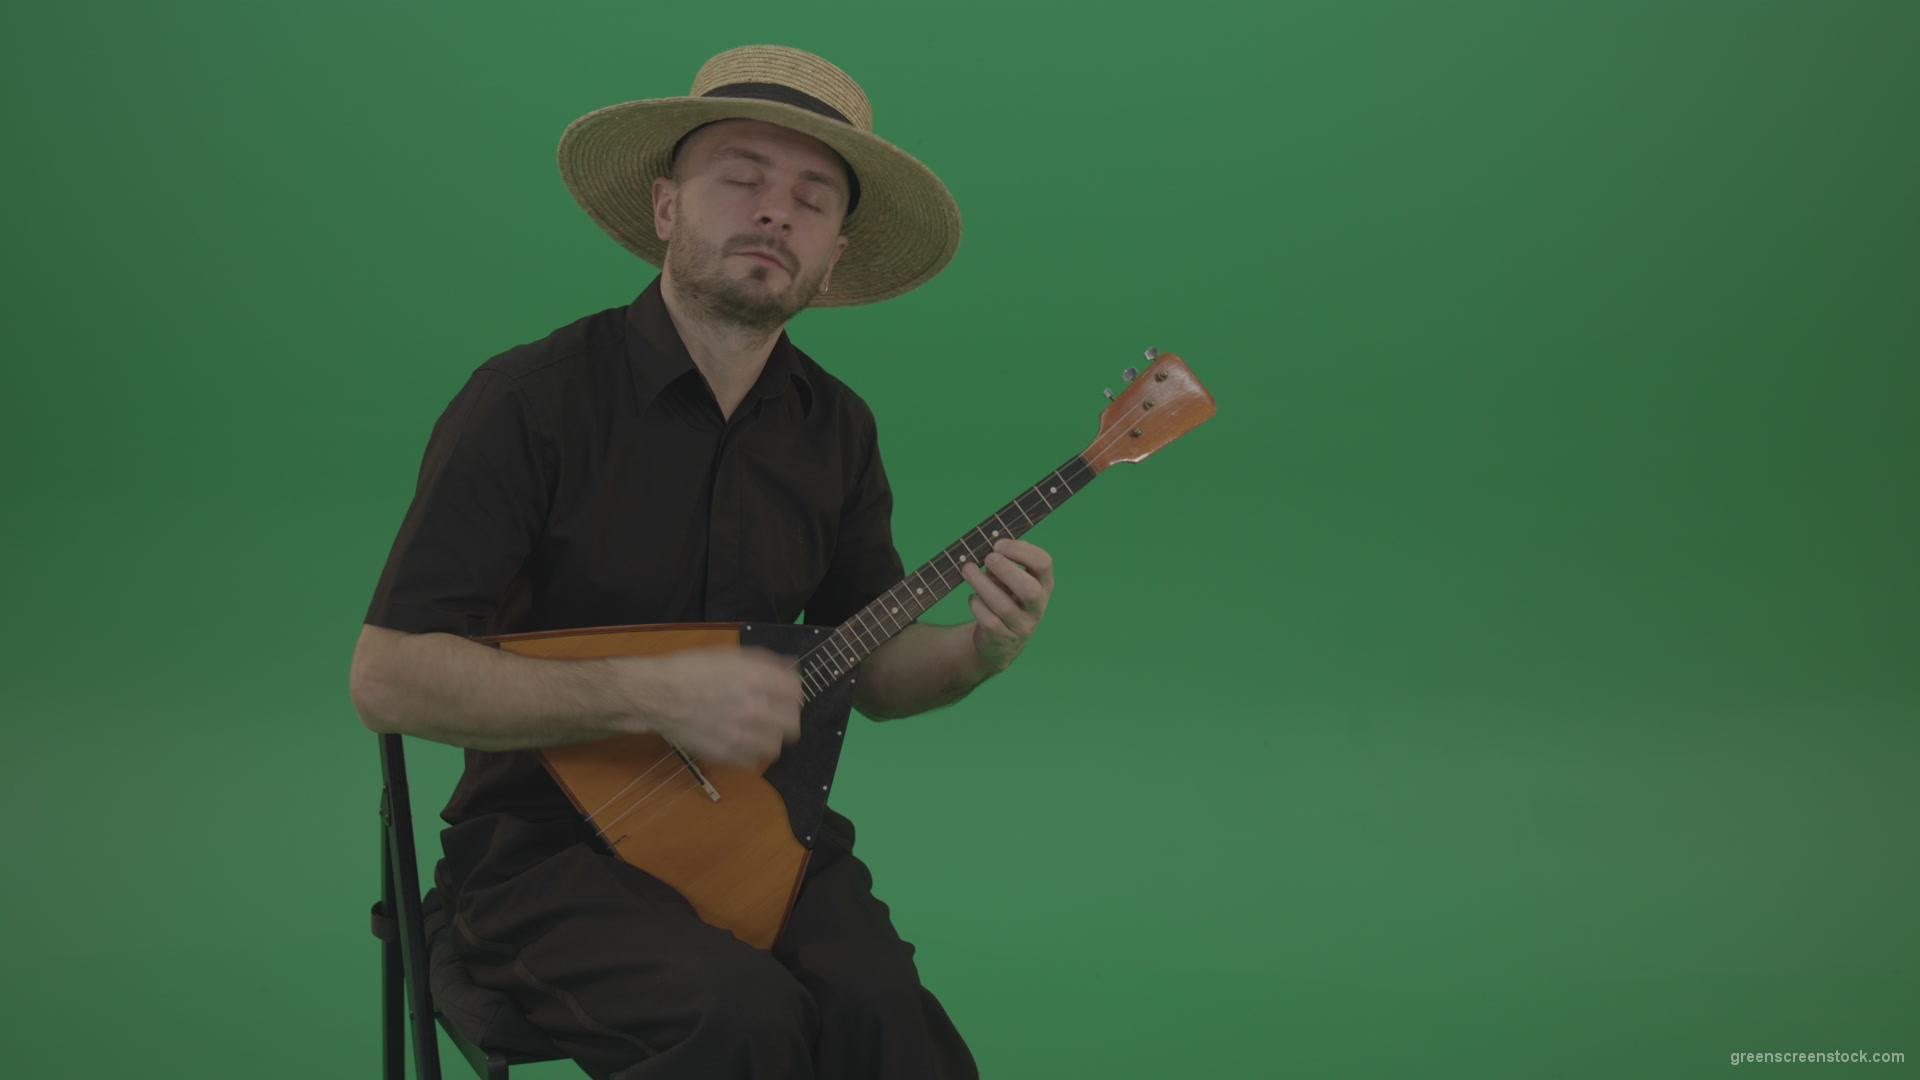 Man-from-village-play-Balalaika-music-instrument-isolated-on-green-screen_005 Green Screen Stock